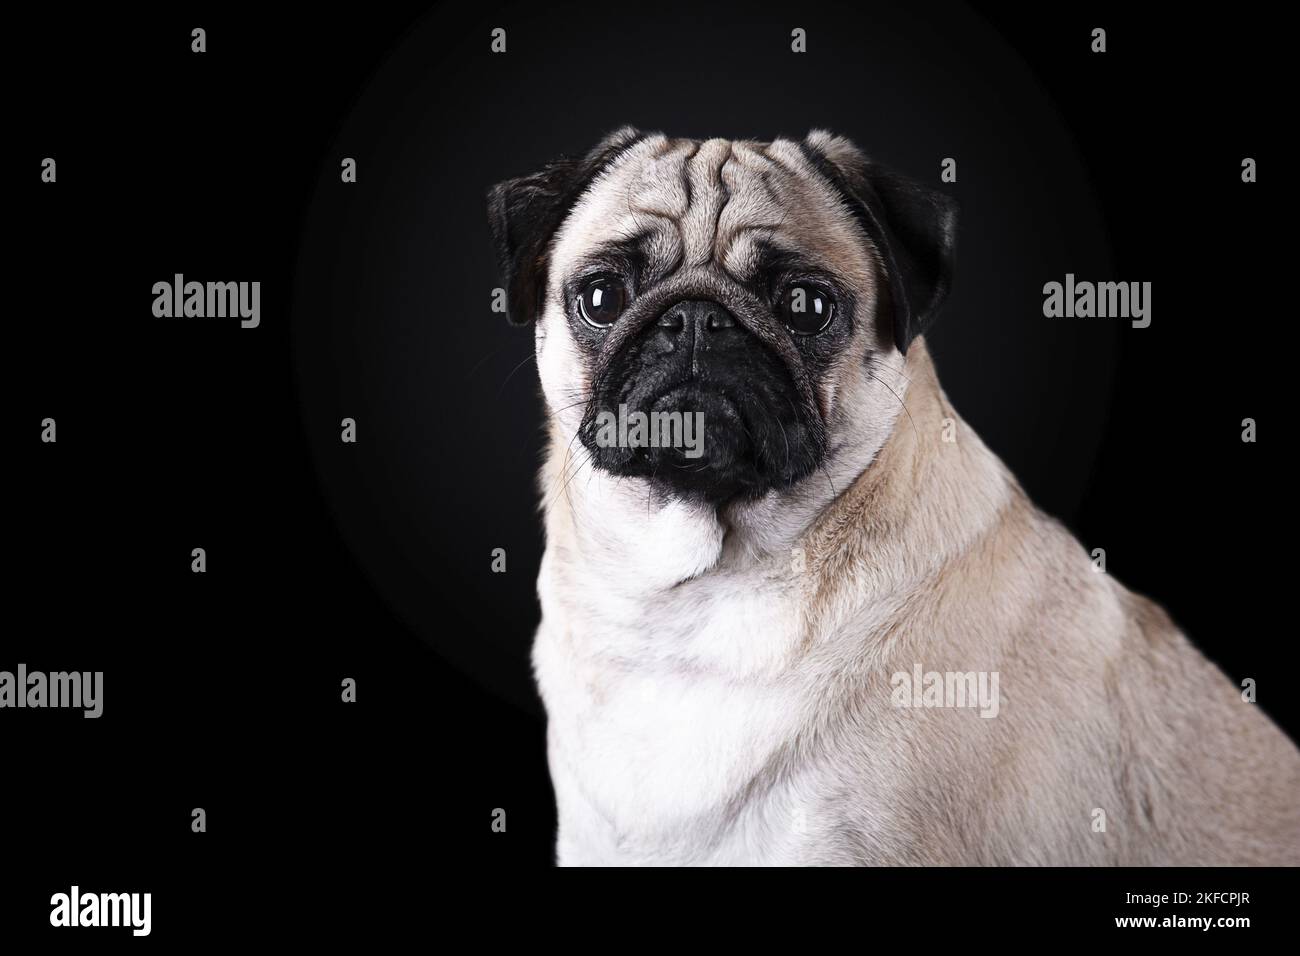 pug portrait in front of black background Stock Photo